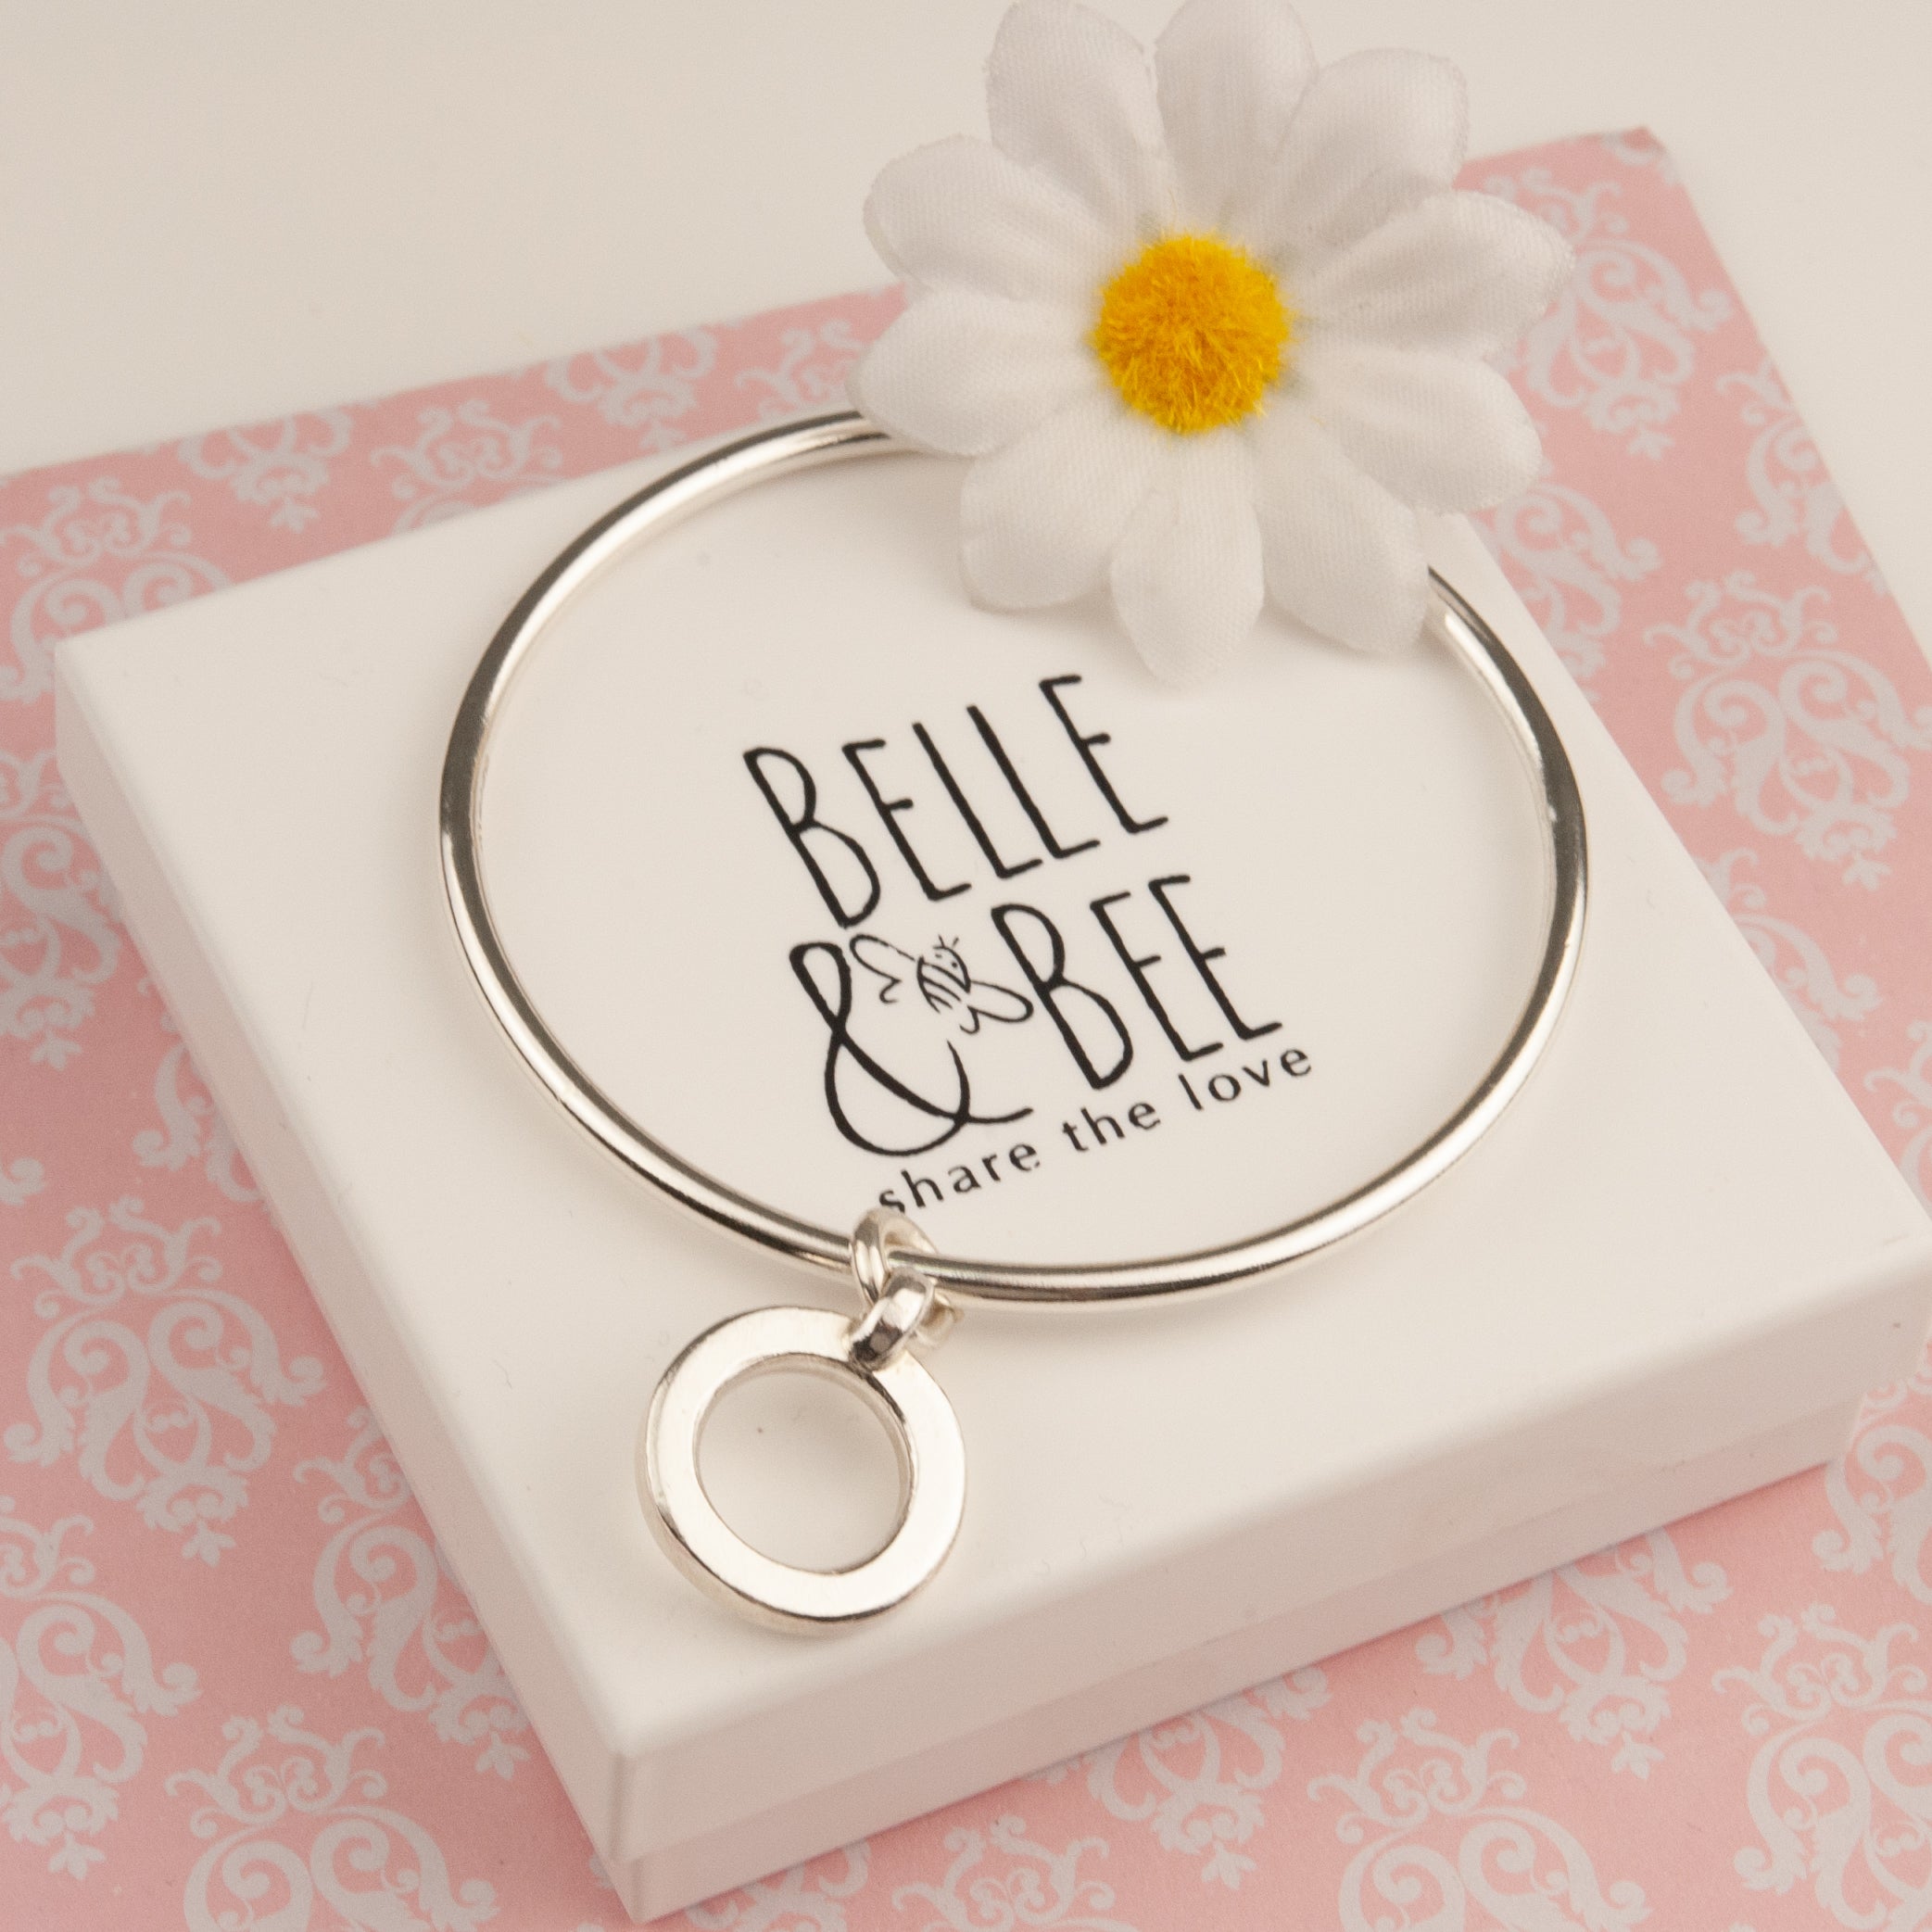 Belle & Bee sterling silver polo charm bangle